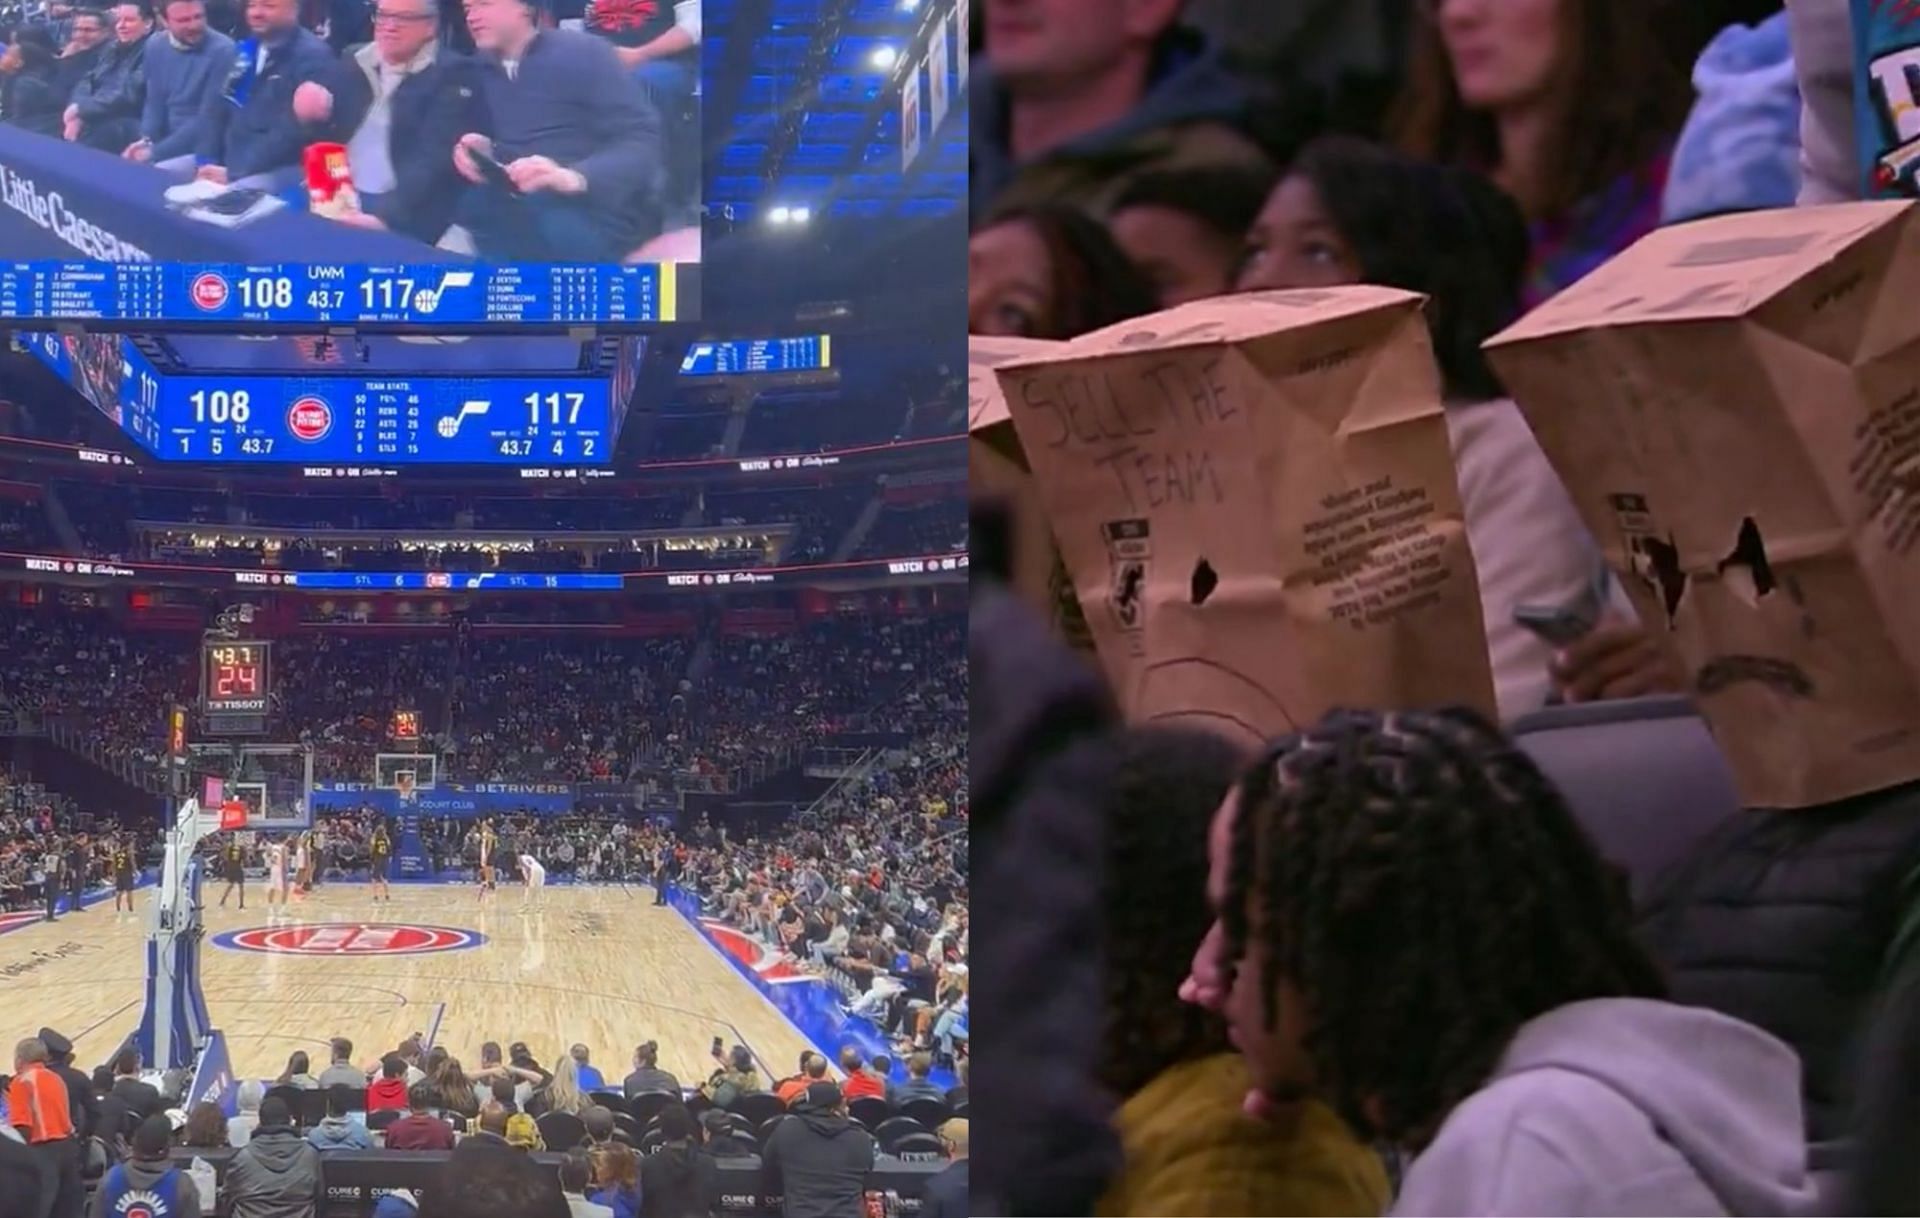 Disgrunted Pistons fans at the Little Caesars Arena chants &quot;Sell The Team&quot; after Detroit losses 25th straight